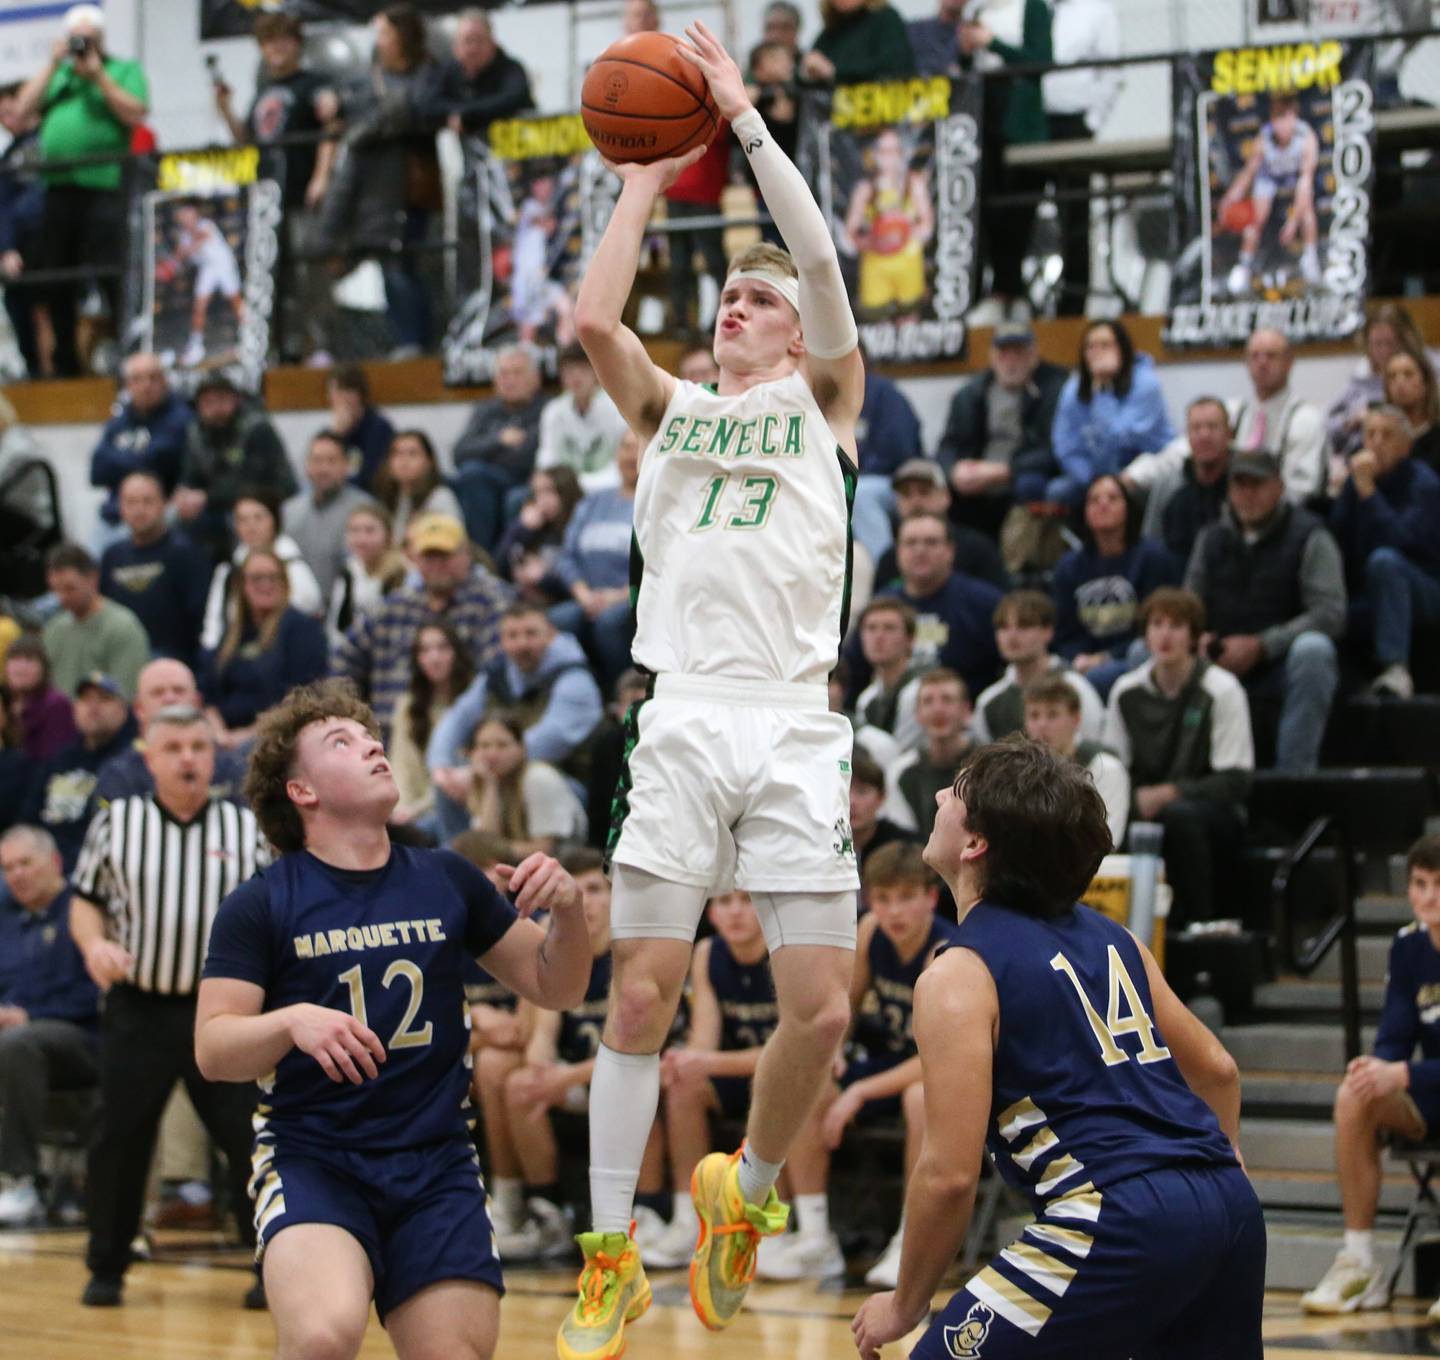 Seneca's Paxton Giertz shoots a jump shot over Marquette's Krew Bond and Alex Graham during the Tri-County Conference championship game on Friday, Jan. 27, 2023 at Putnam County High School.